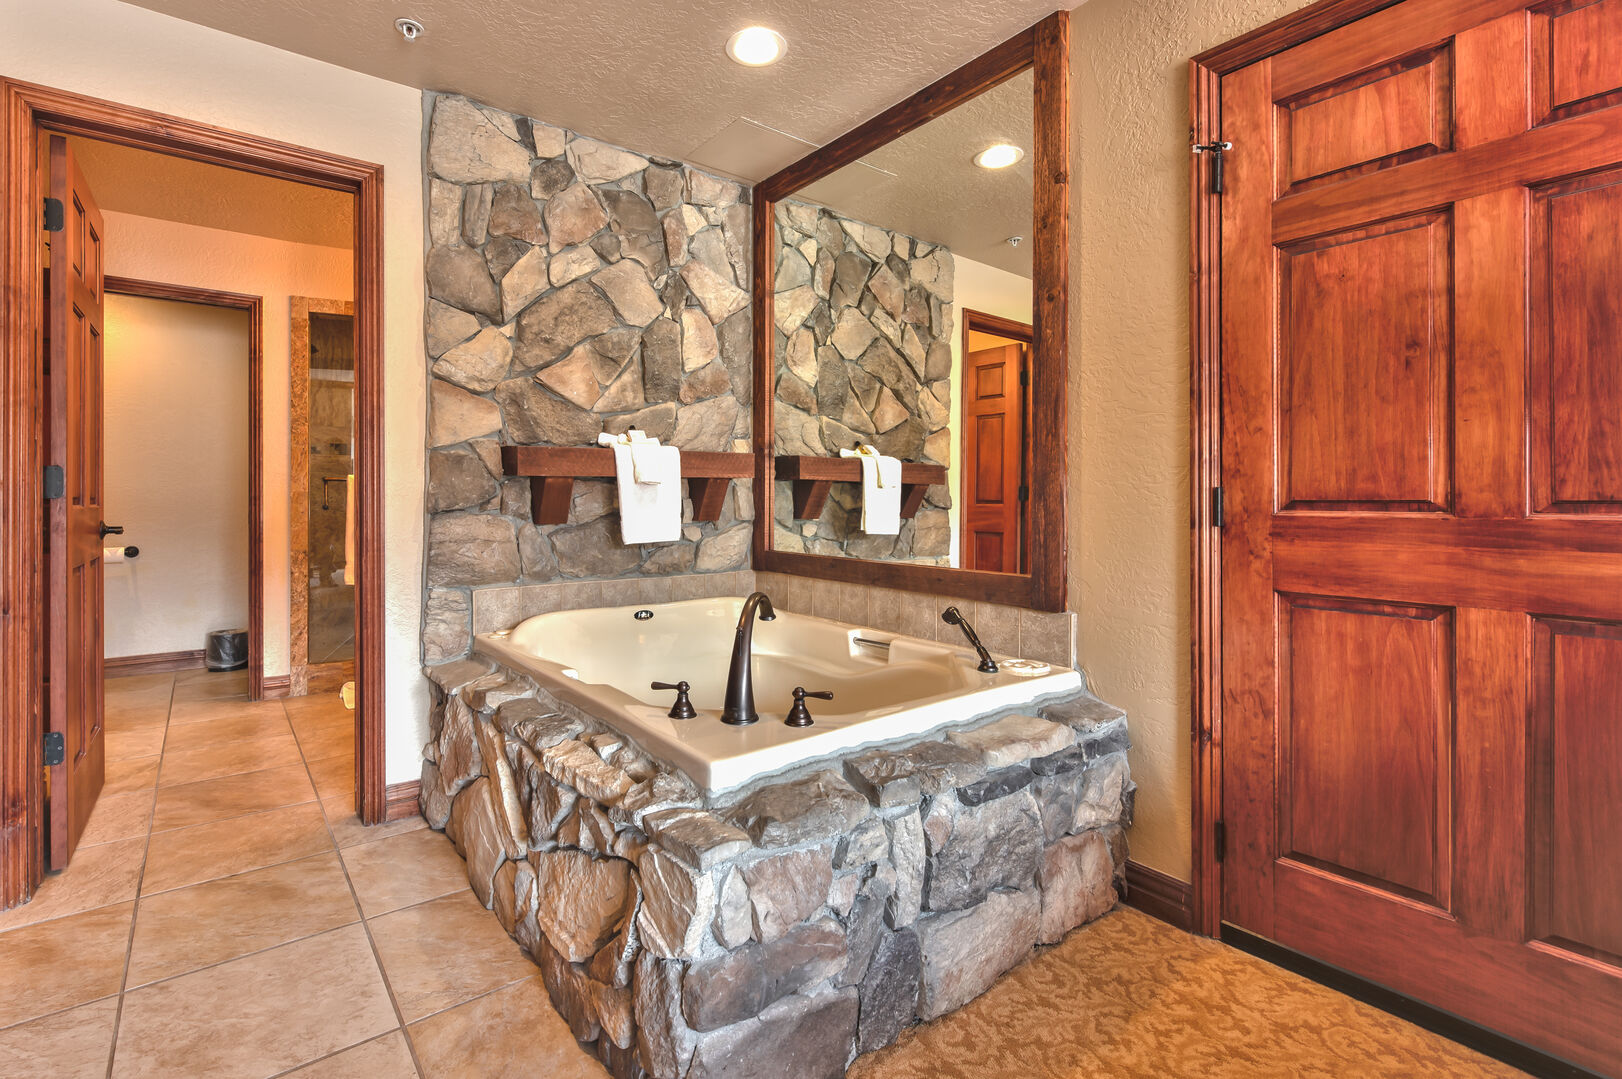 Master suite features a deep soaking jetted tub